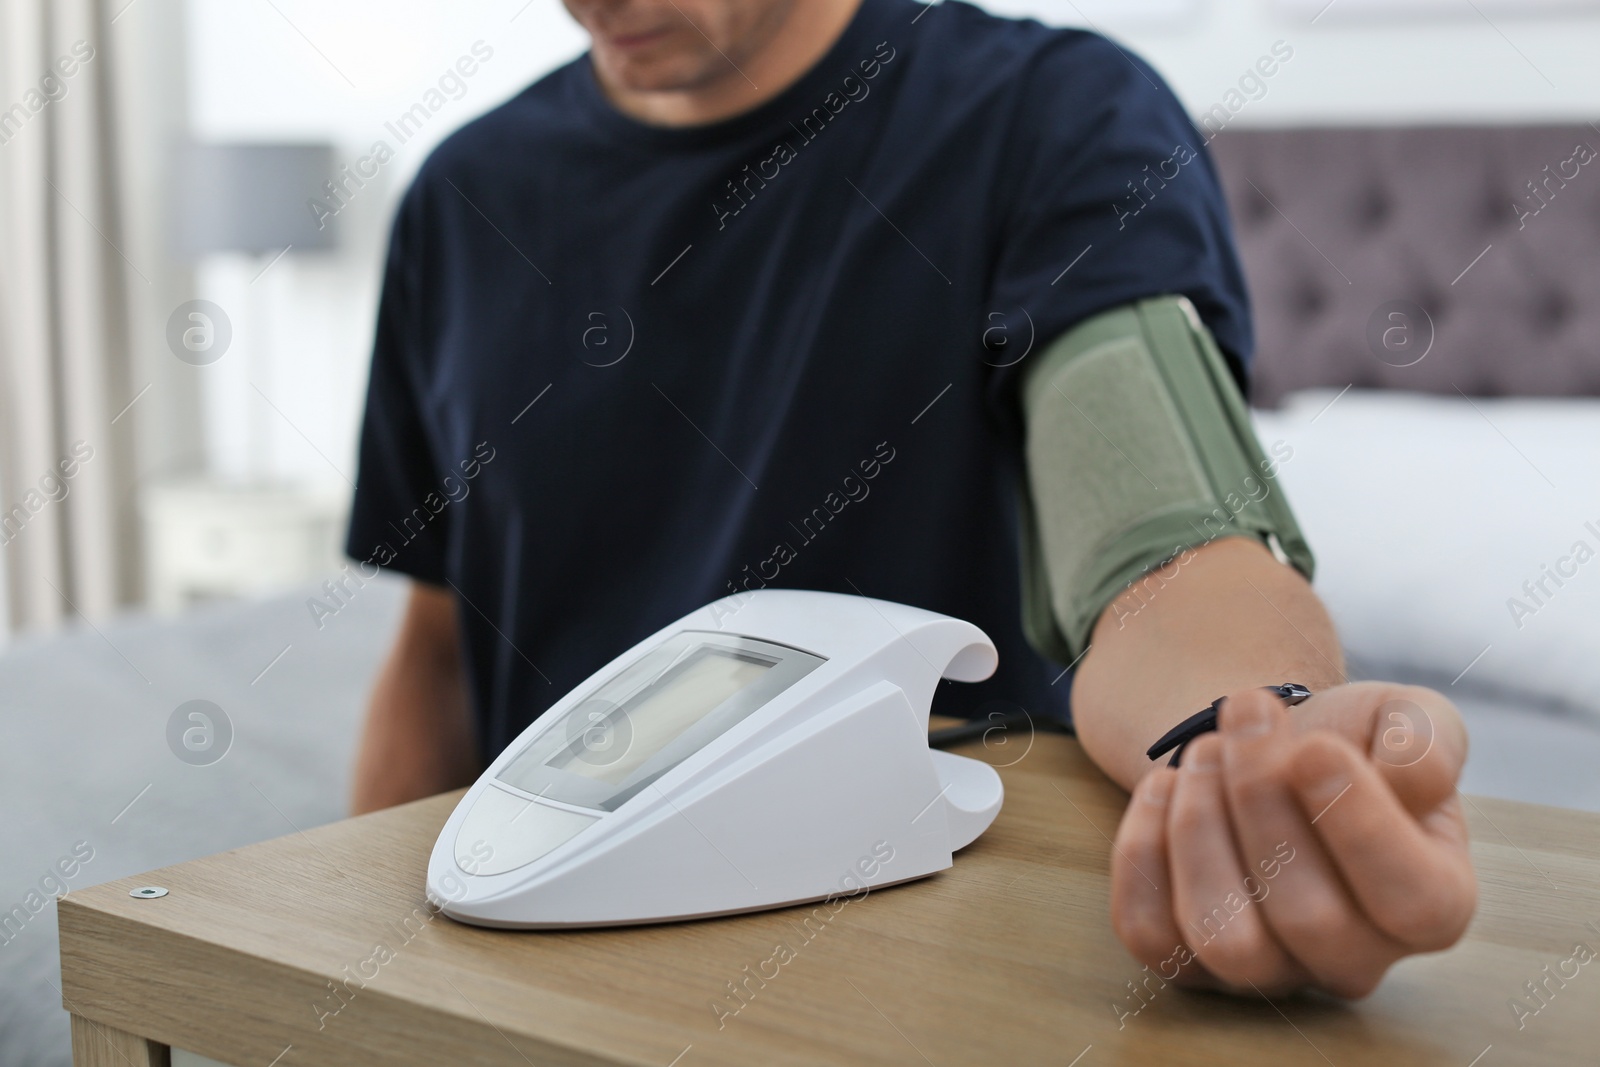 Photo of Man checking blood pressure with sphygmomanometer at table indoors, closeup. Cardiology concept